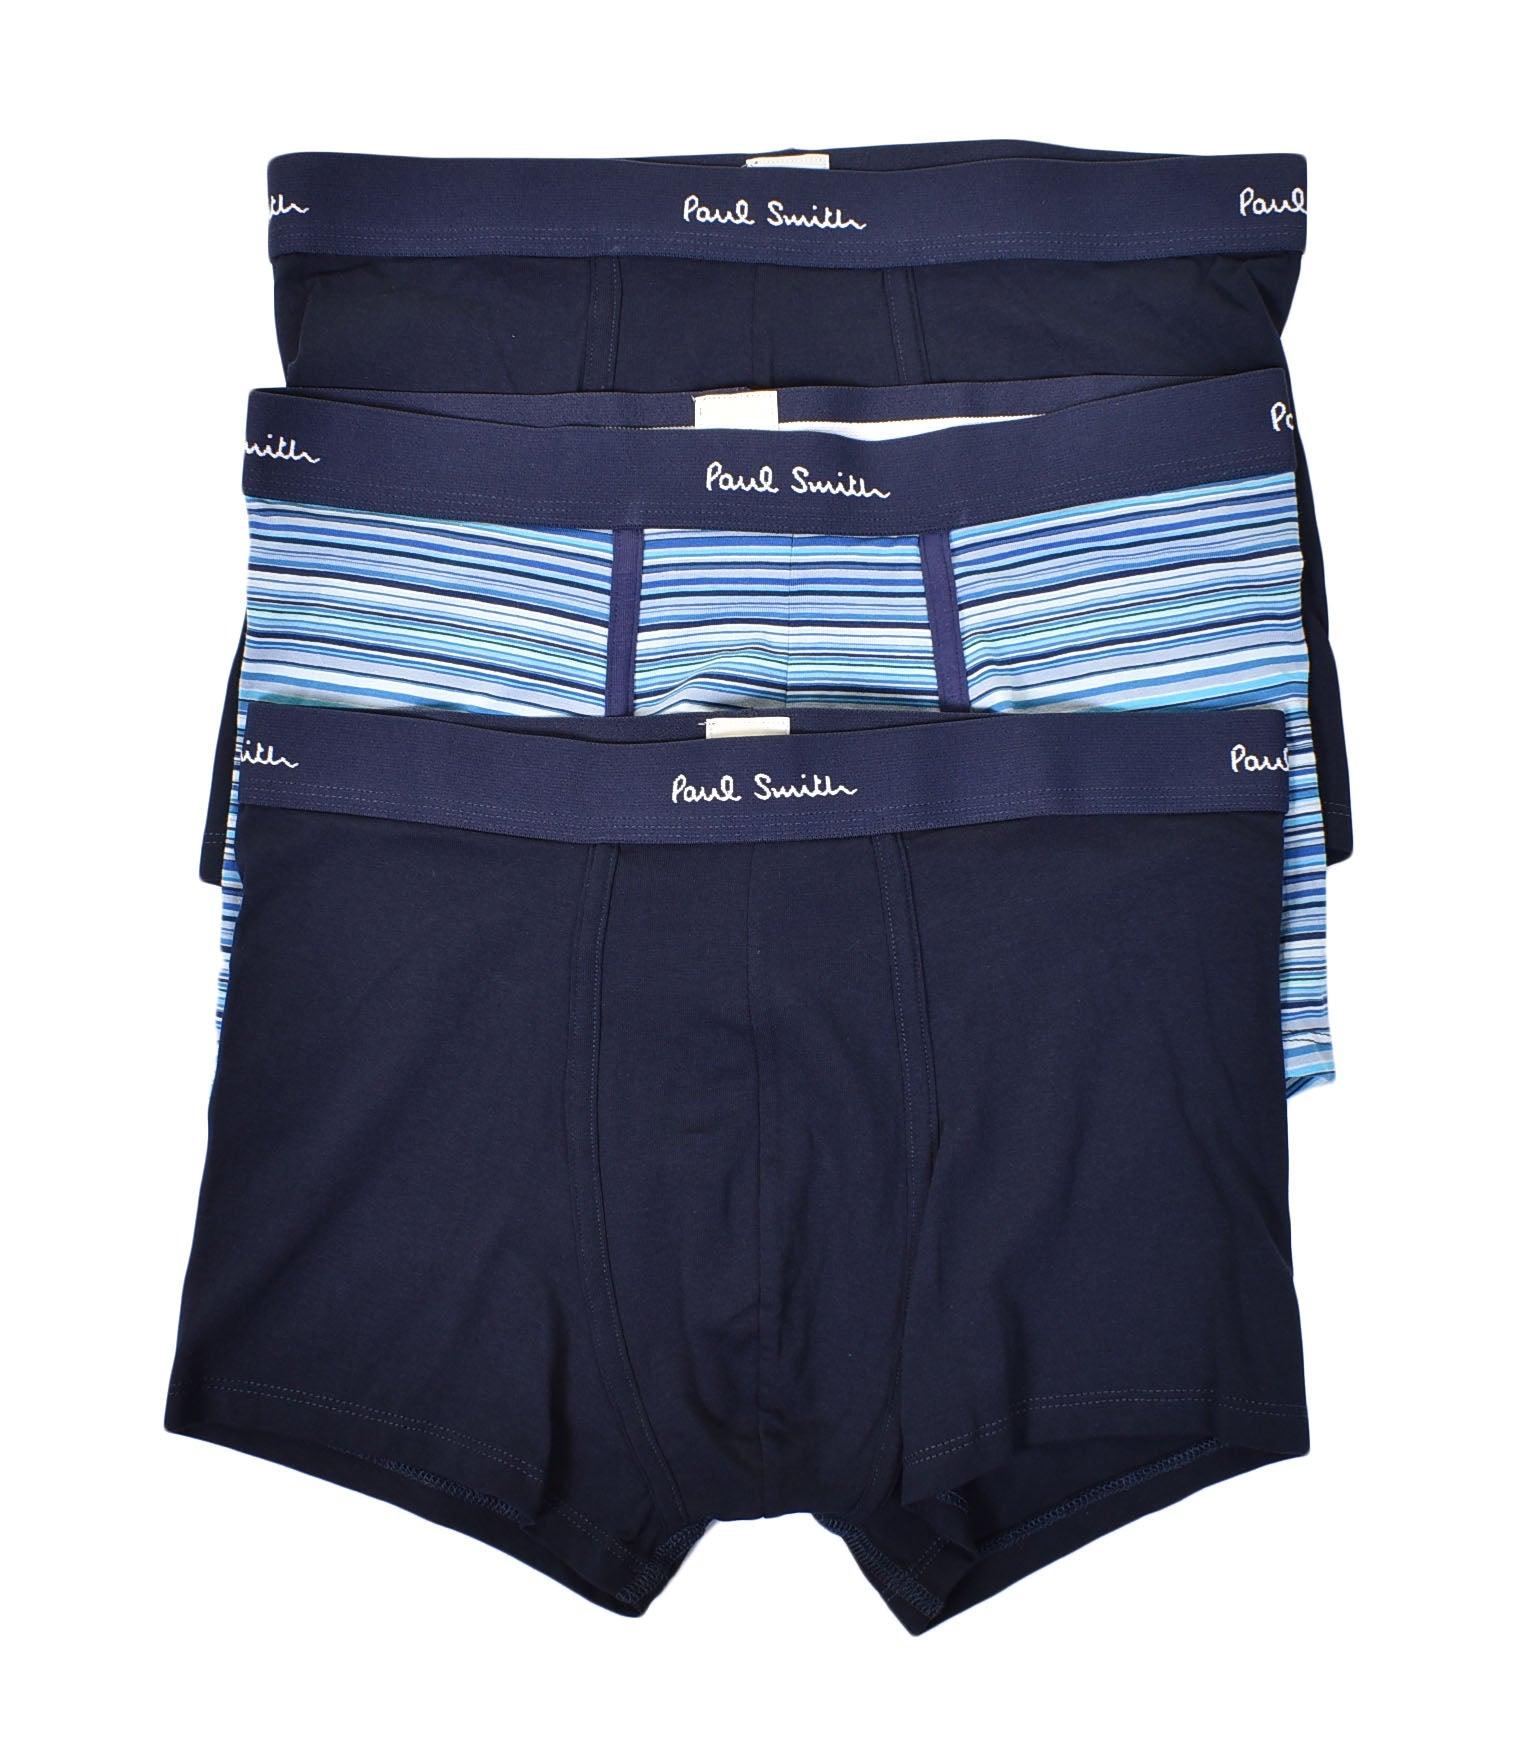 3 Pack Trunk Boxers Signature Navy